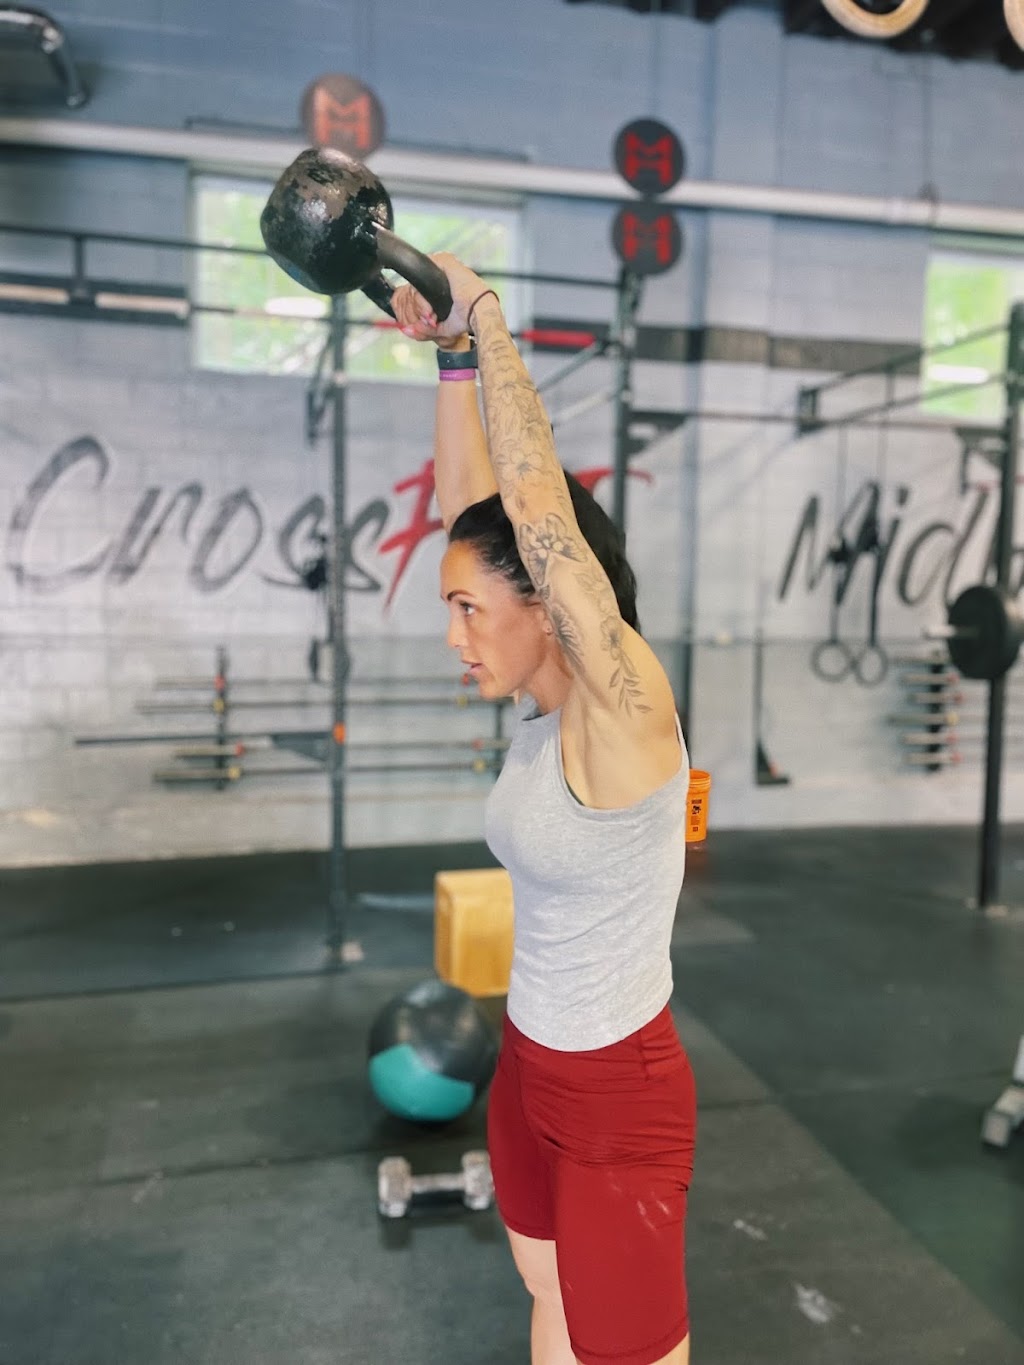 CrossFit MidHudson | 10 Commercial Ave, Highland, NY 12528 | Phone: (845) 417-4962